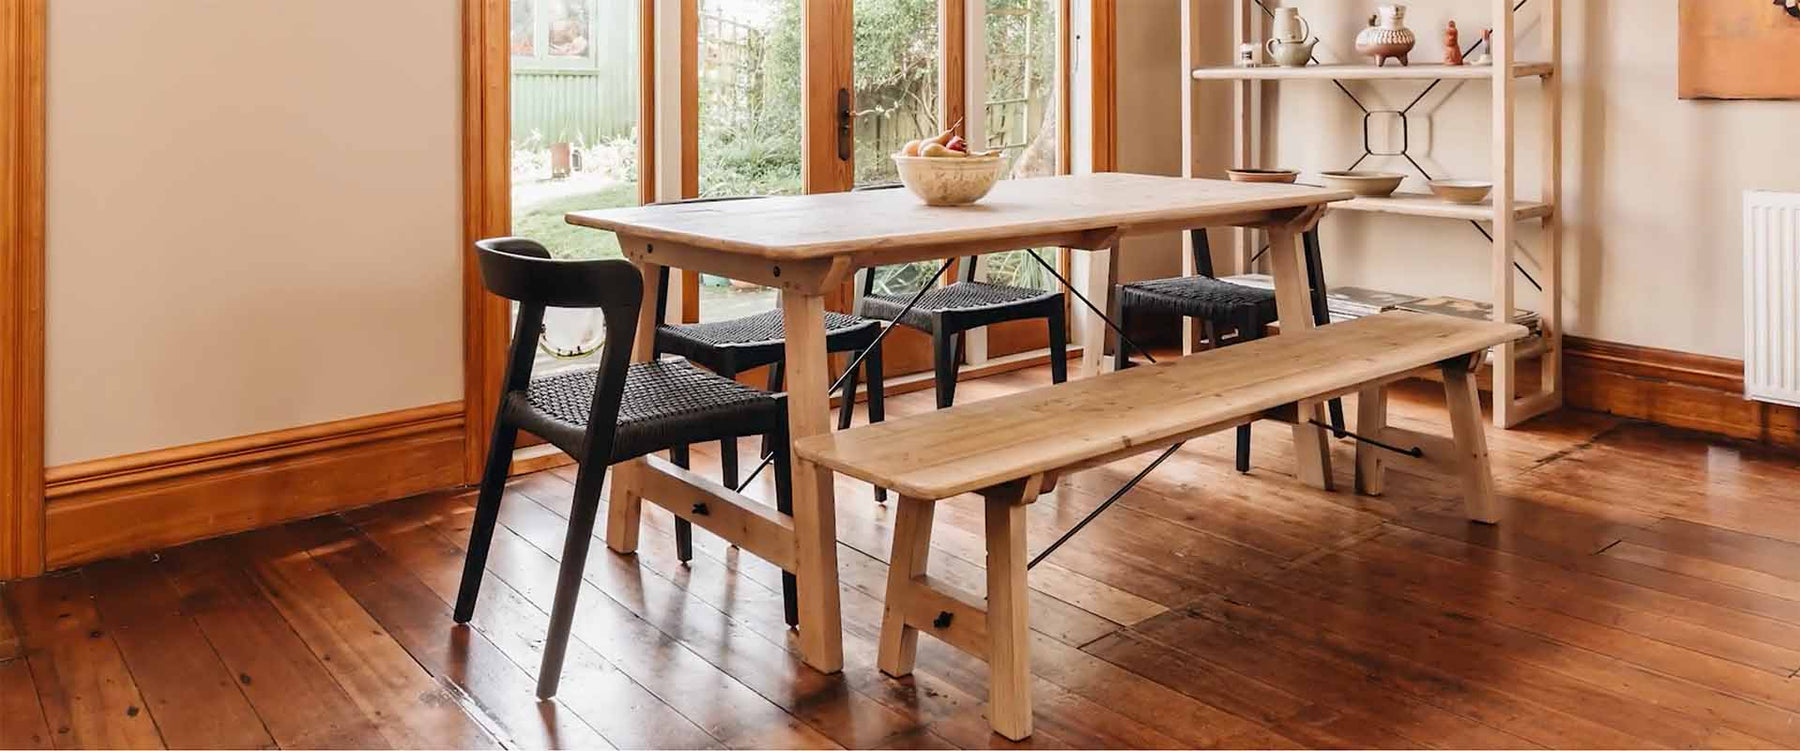 Dining Chairs in New Zealand: How to Find the Right Balance Between Style and Functionality